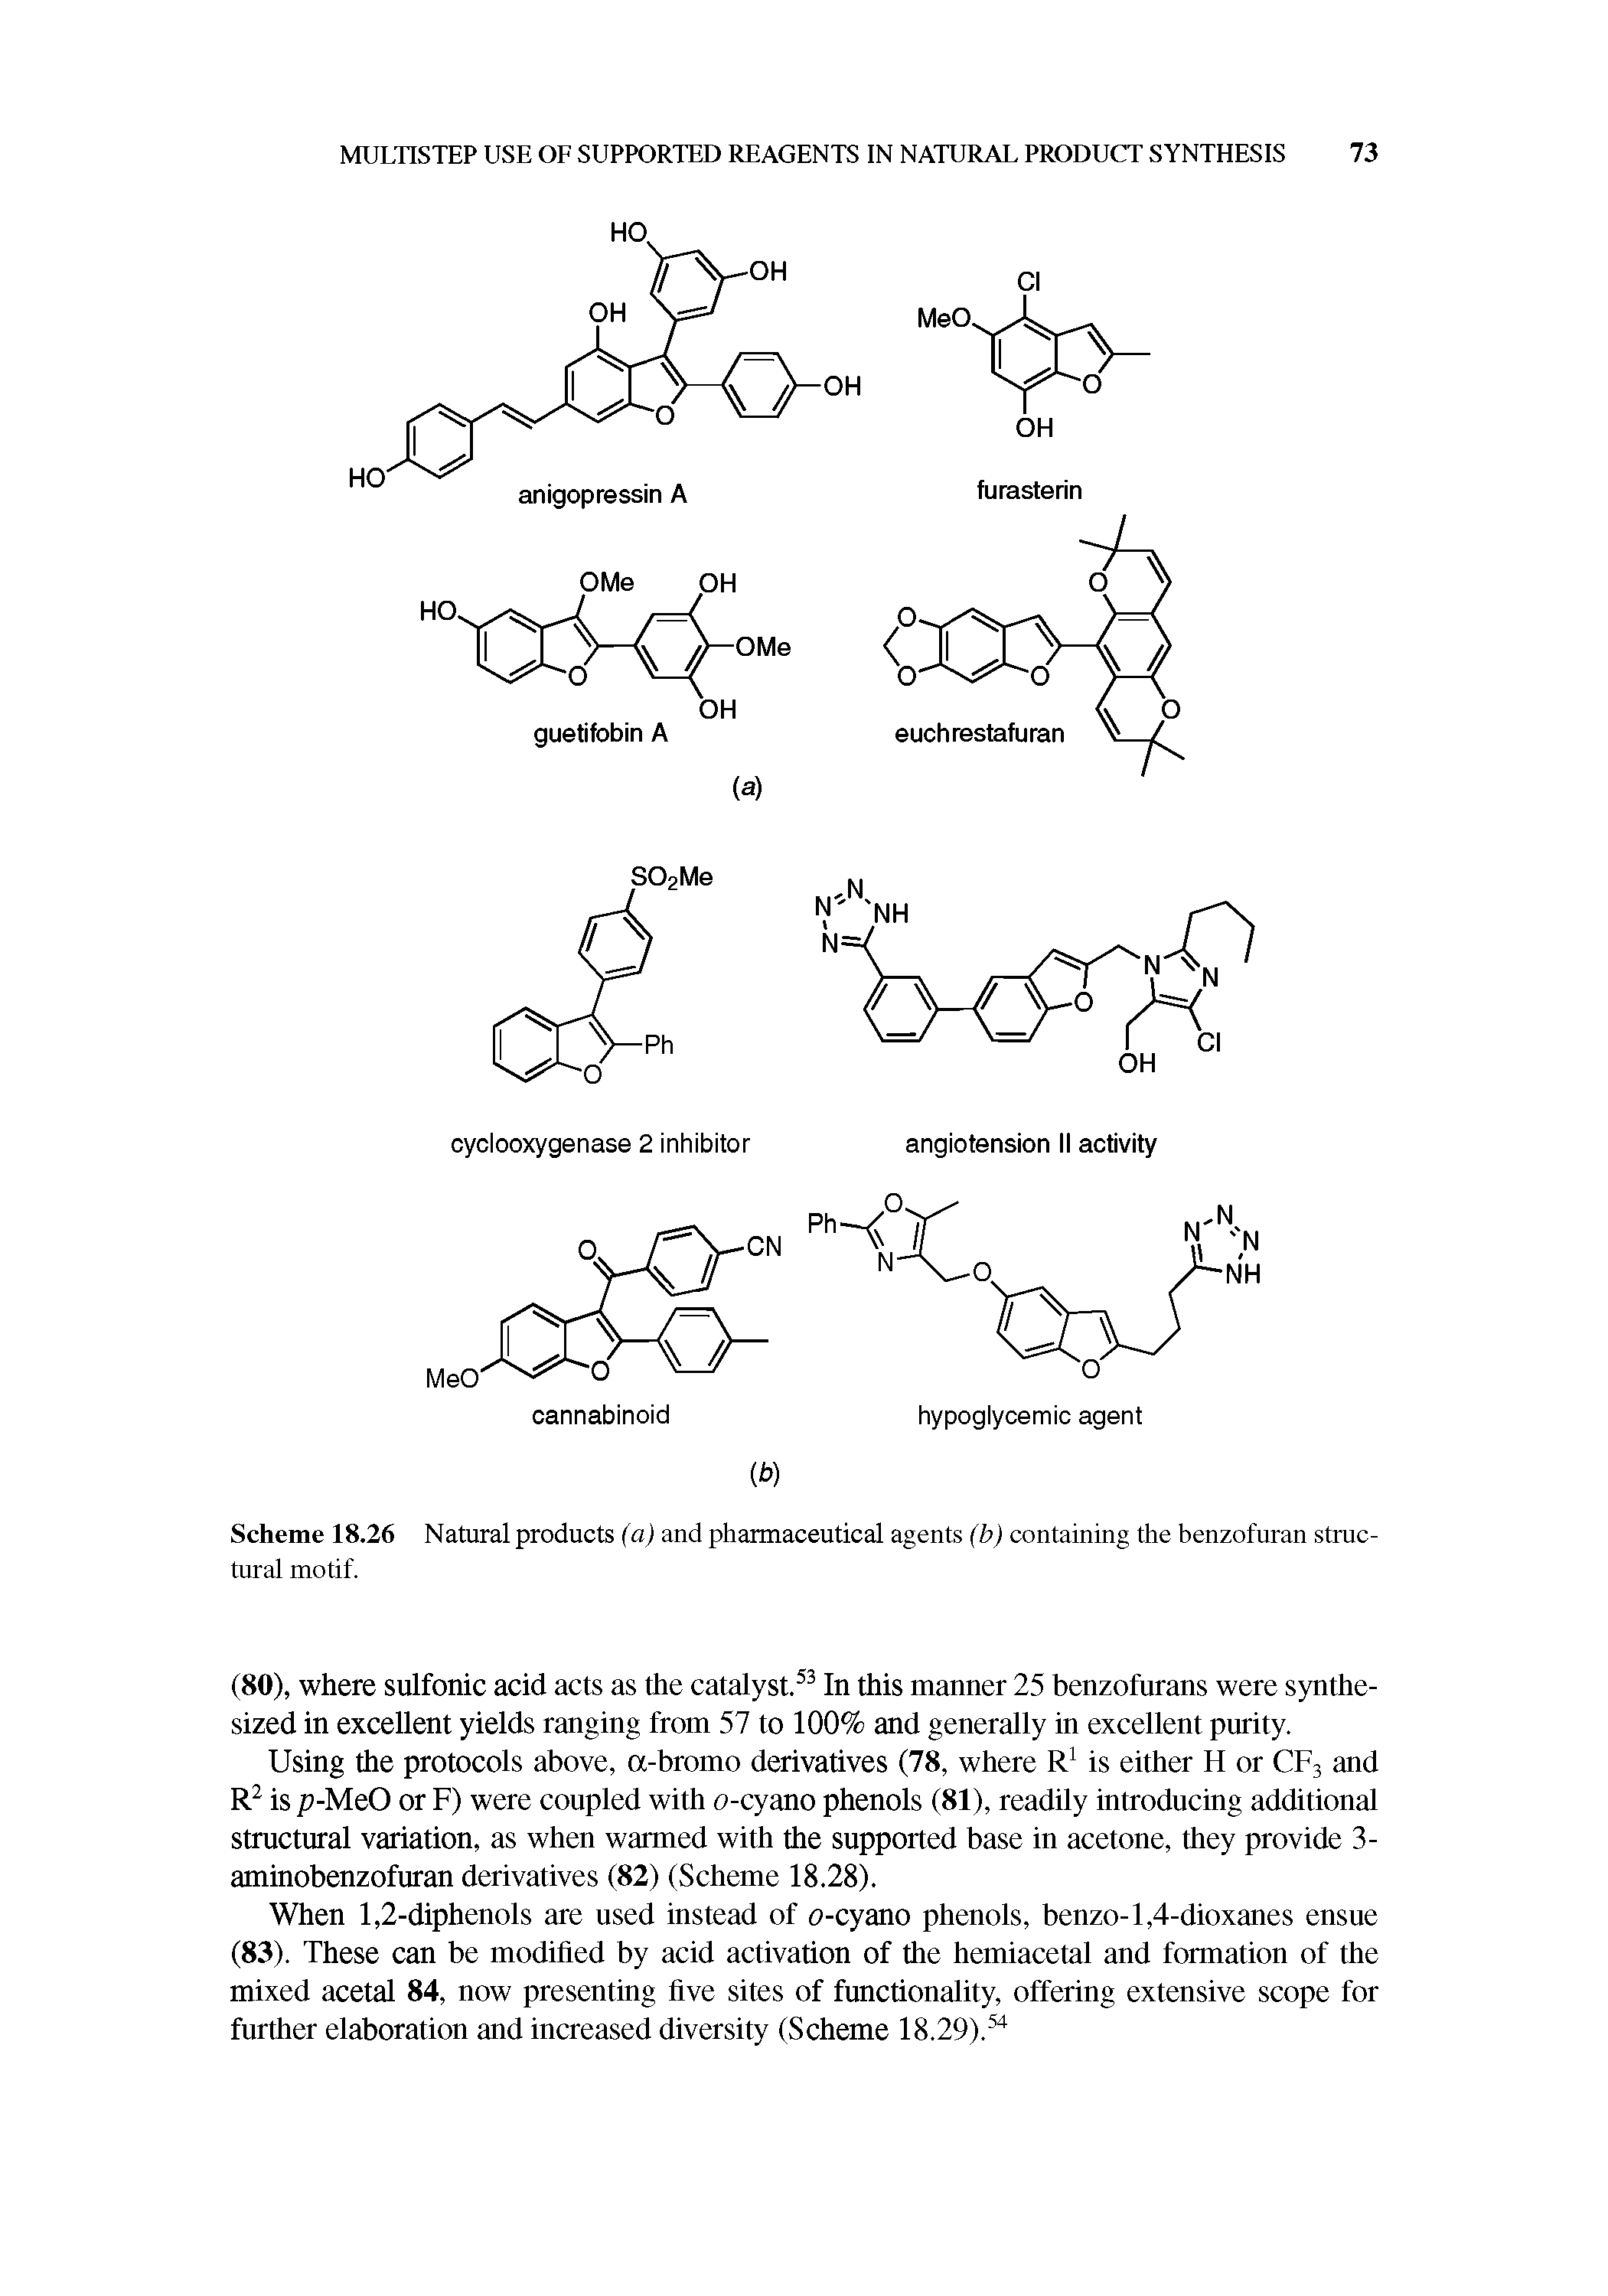 Scheme 18.26 Natural products (a) and pharmaceutical agents (b) containing the benzofuran structural motif.